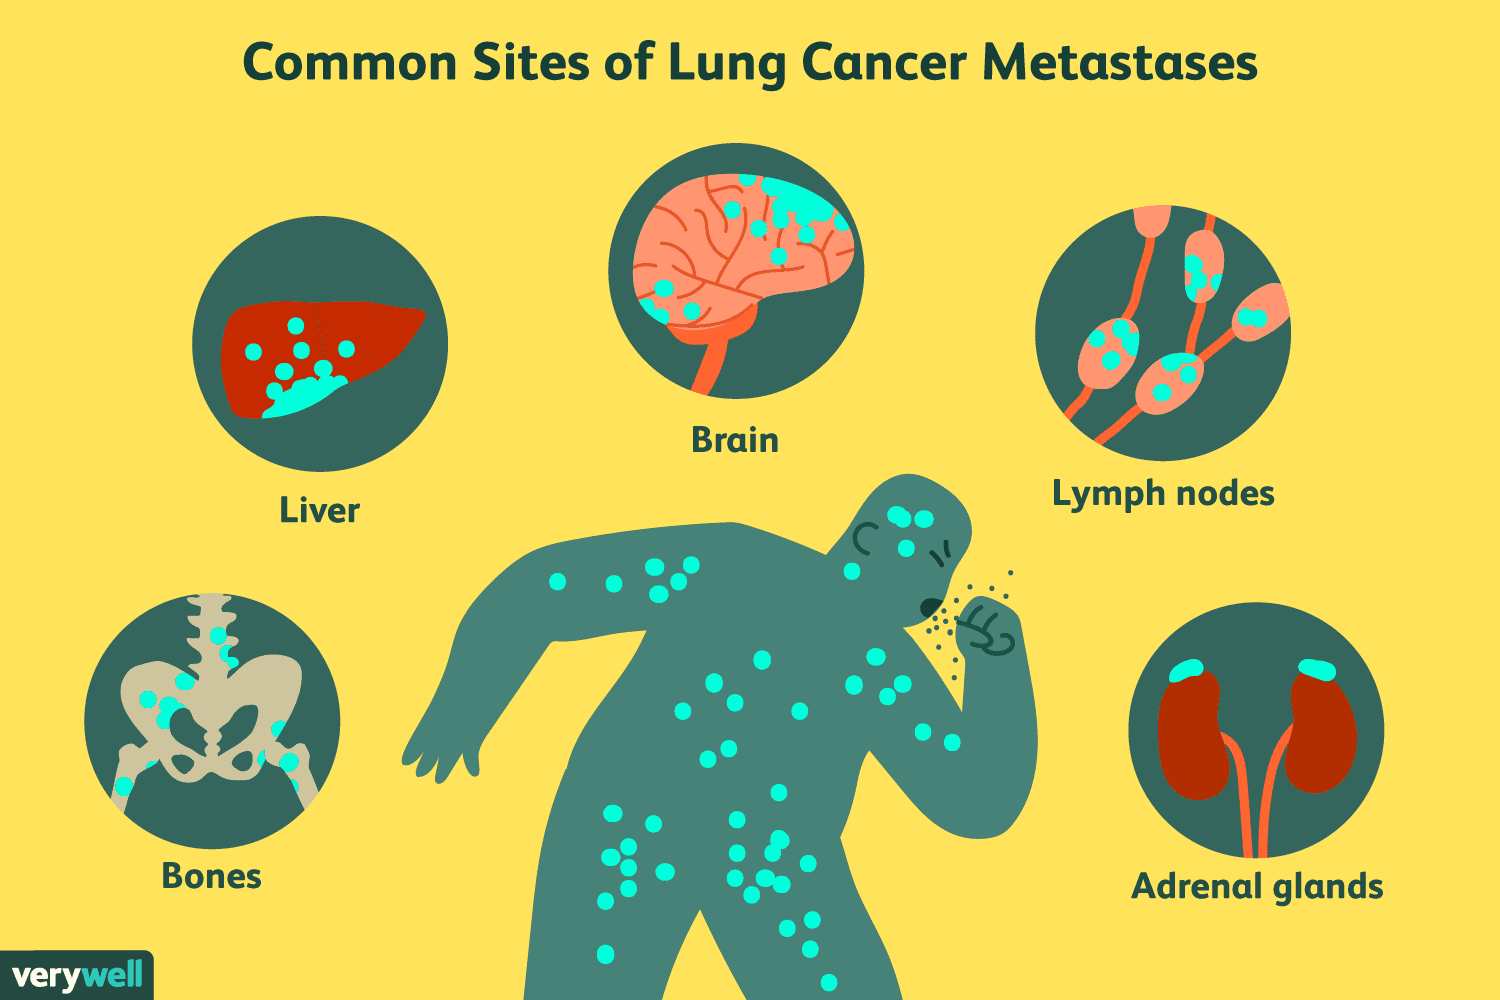 Common Sites of Lung Cancer Metastases